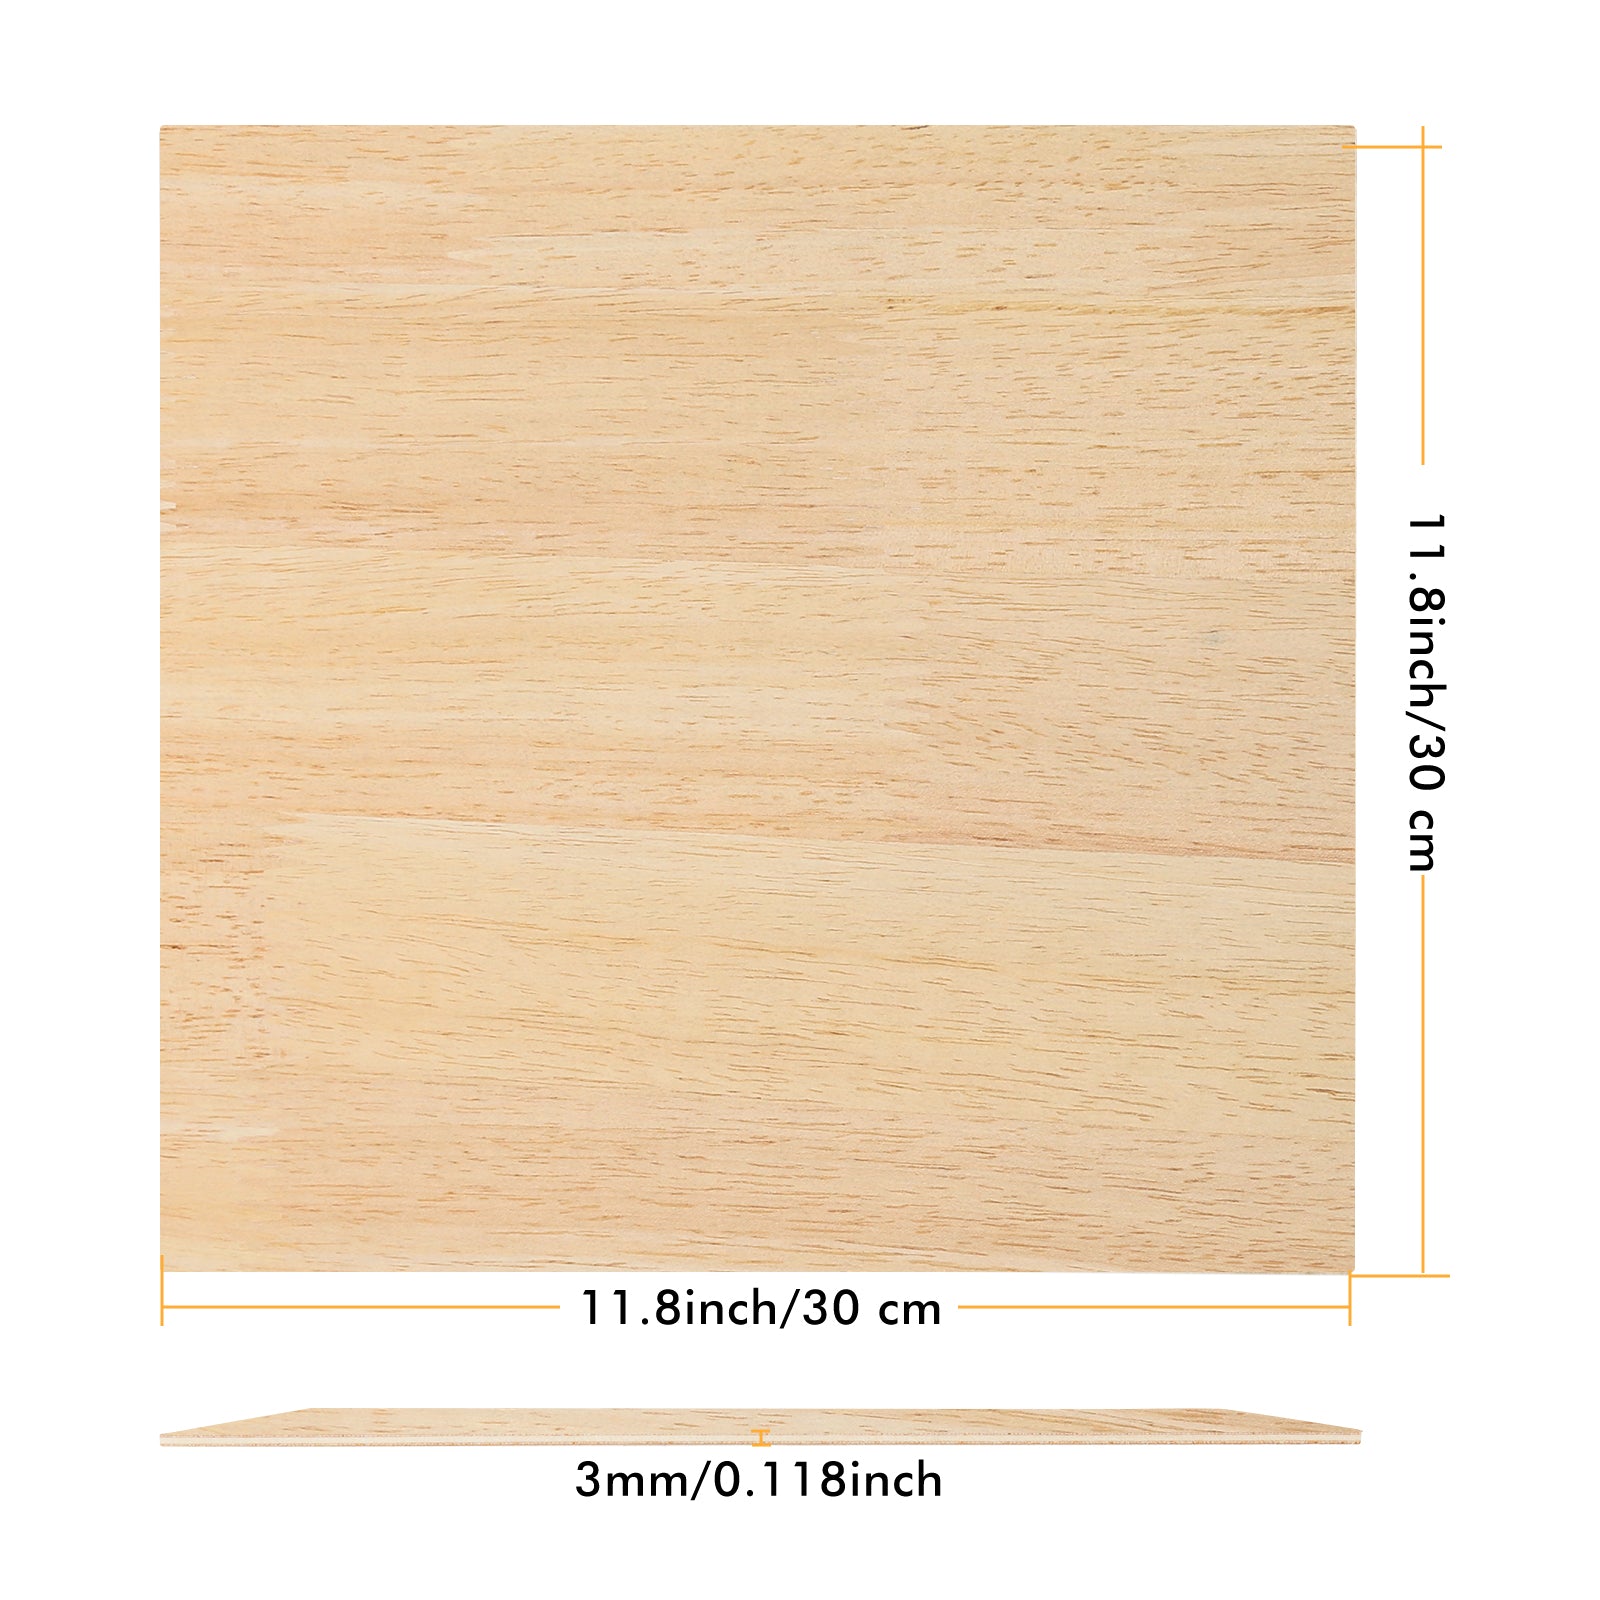 6pcs Rubberwood Spliced Plywood 12" x 12" Unfinished Wood for Laser Engraving Cutting Crafts - CREATORALLY